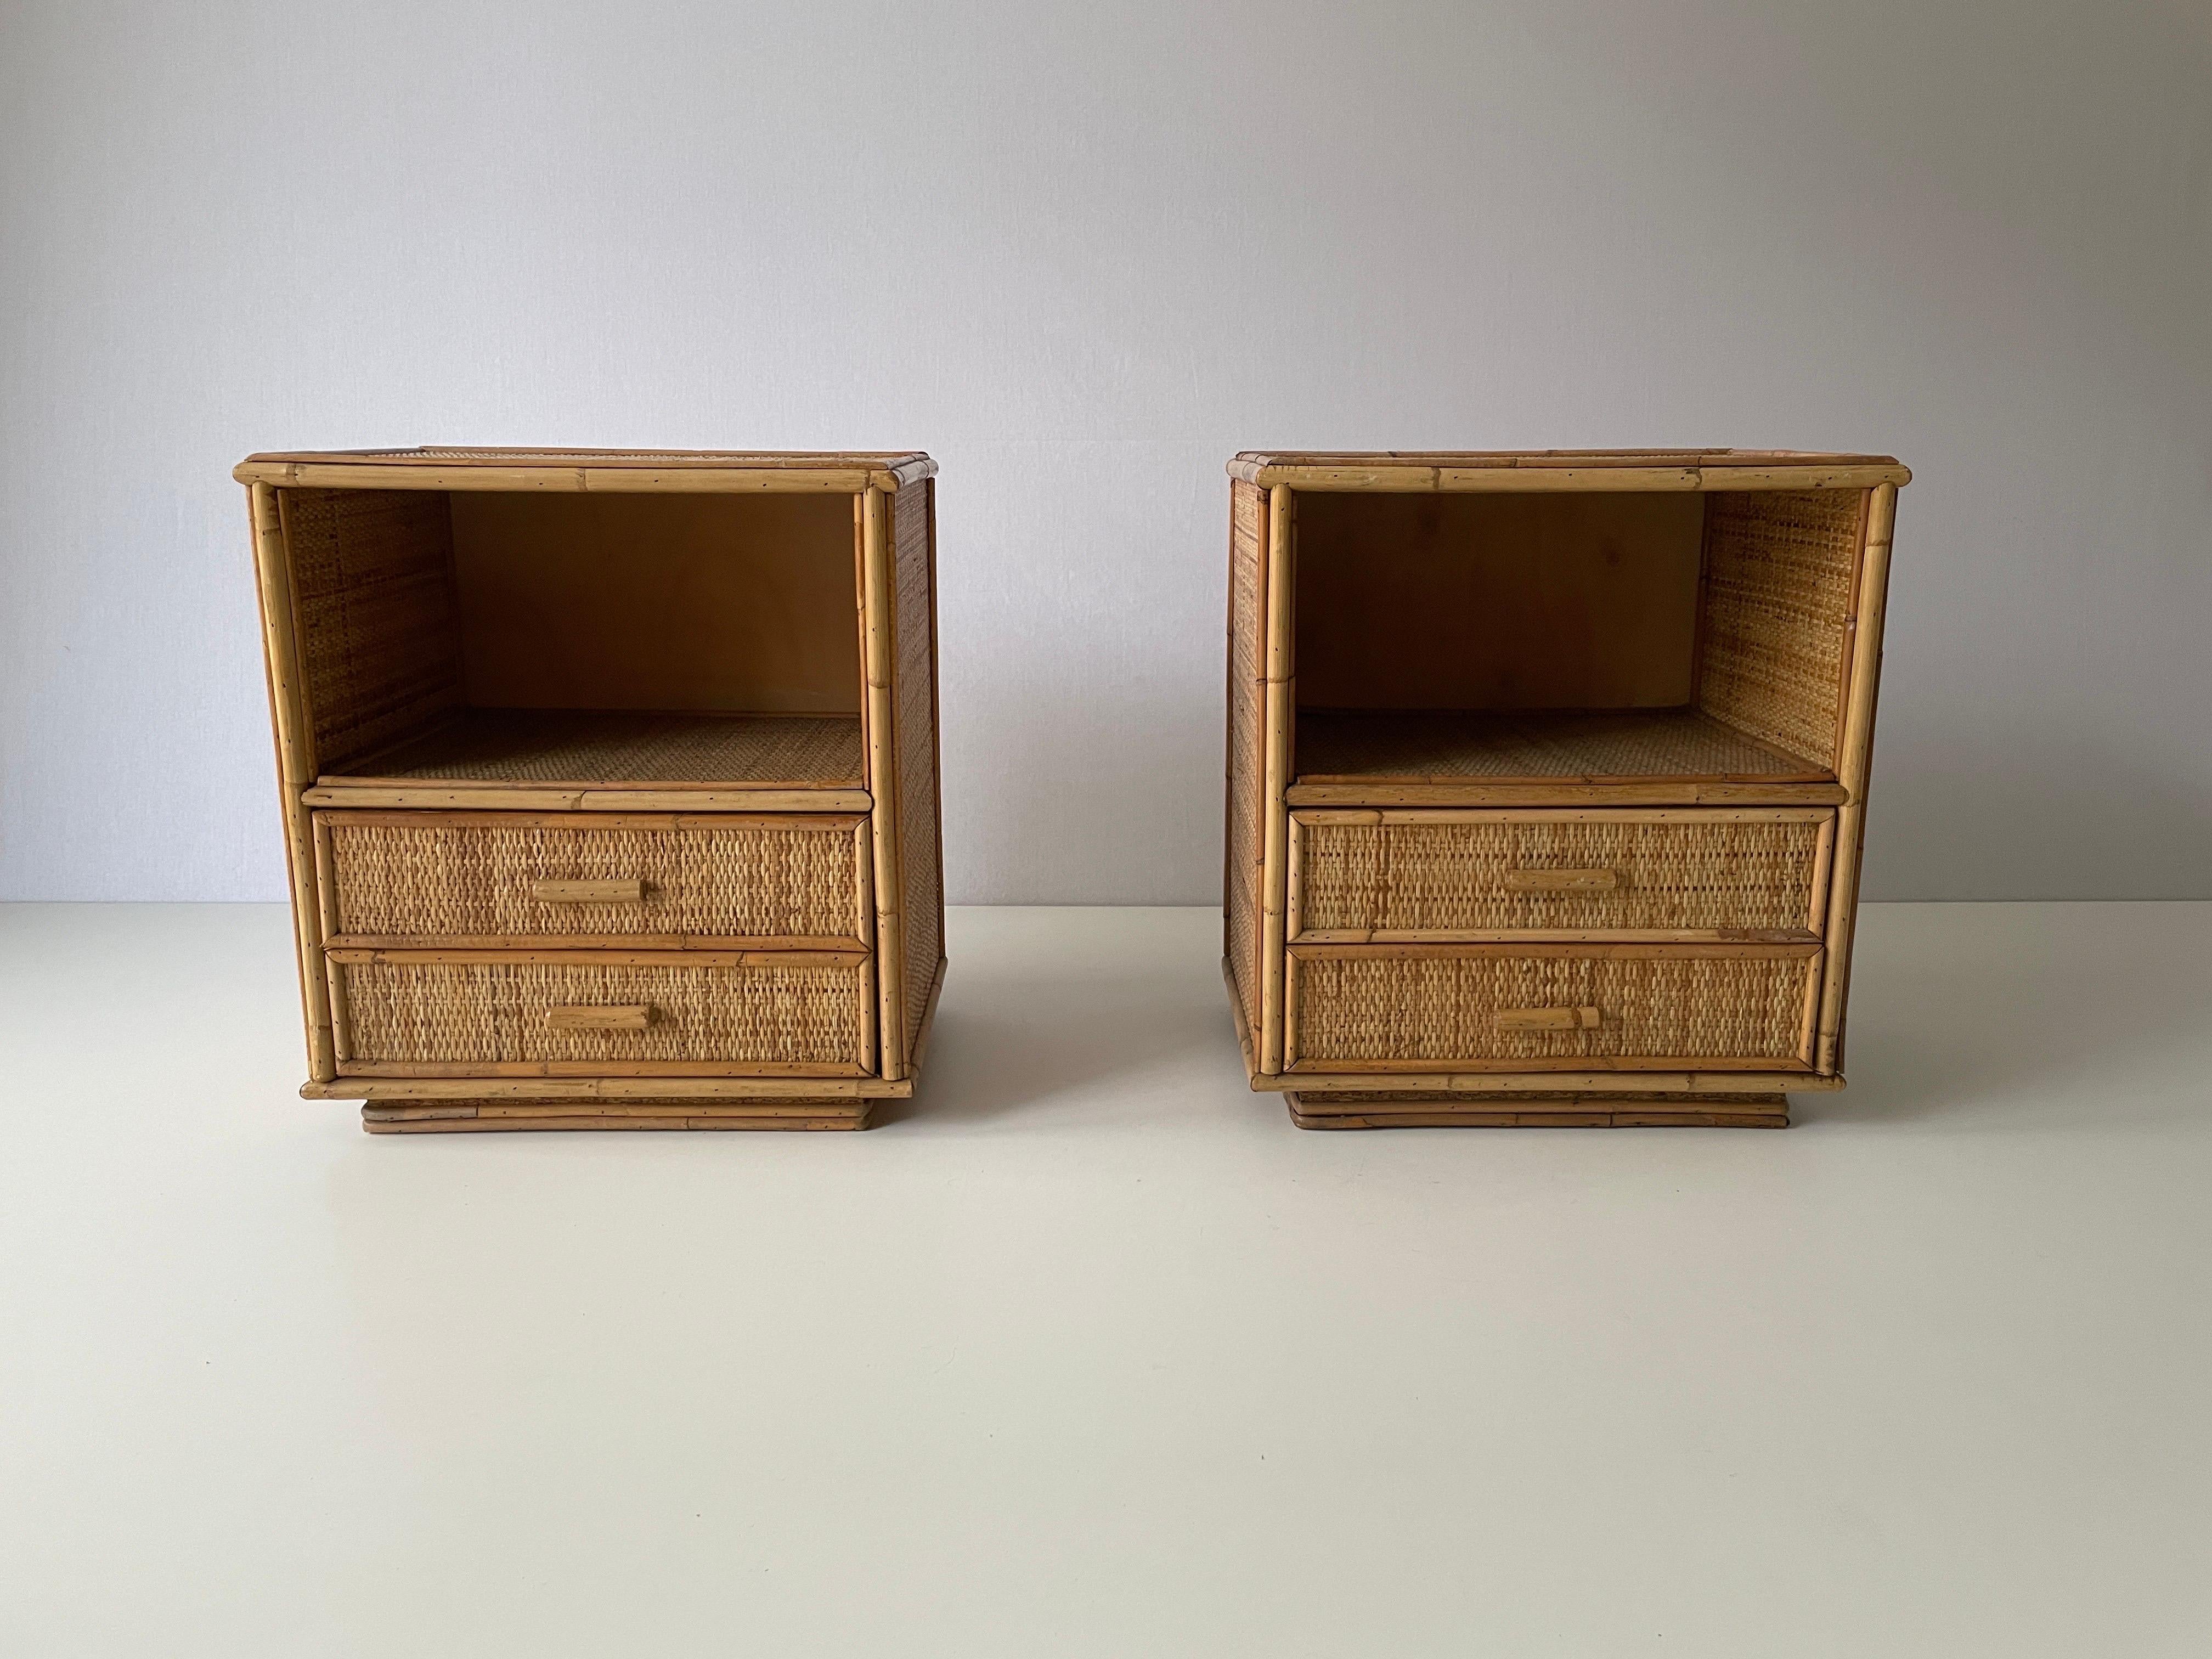 Mid-century Bamboo & Rattan Pair of Bedside Tables, 1970s, Italy

No damage, no crack.
Wear consistent with age and use.

Measurements: 
Height: 52 cm
Width: 46 cm
Depth: 32 cm